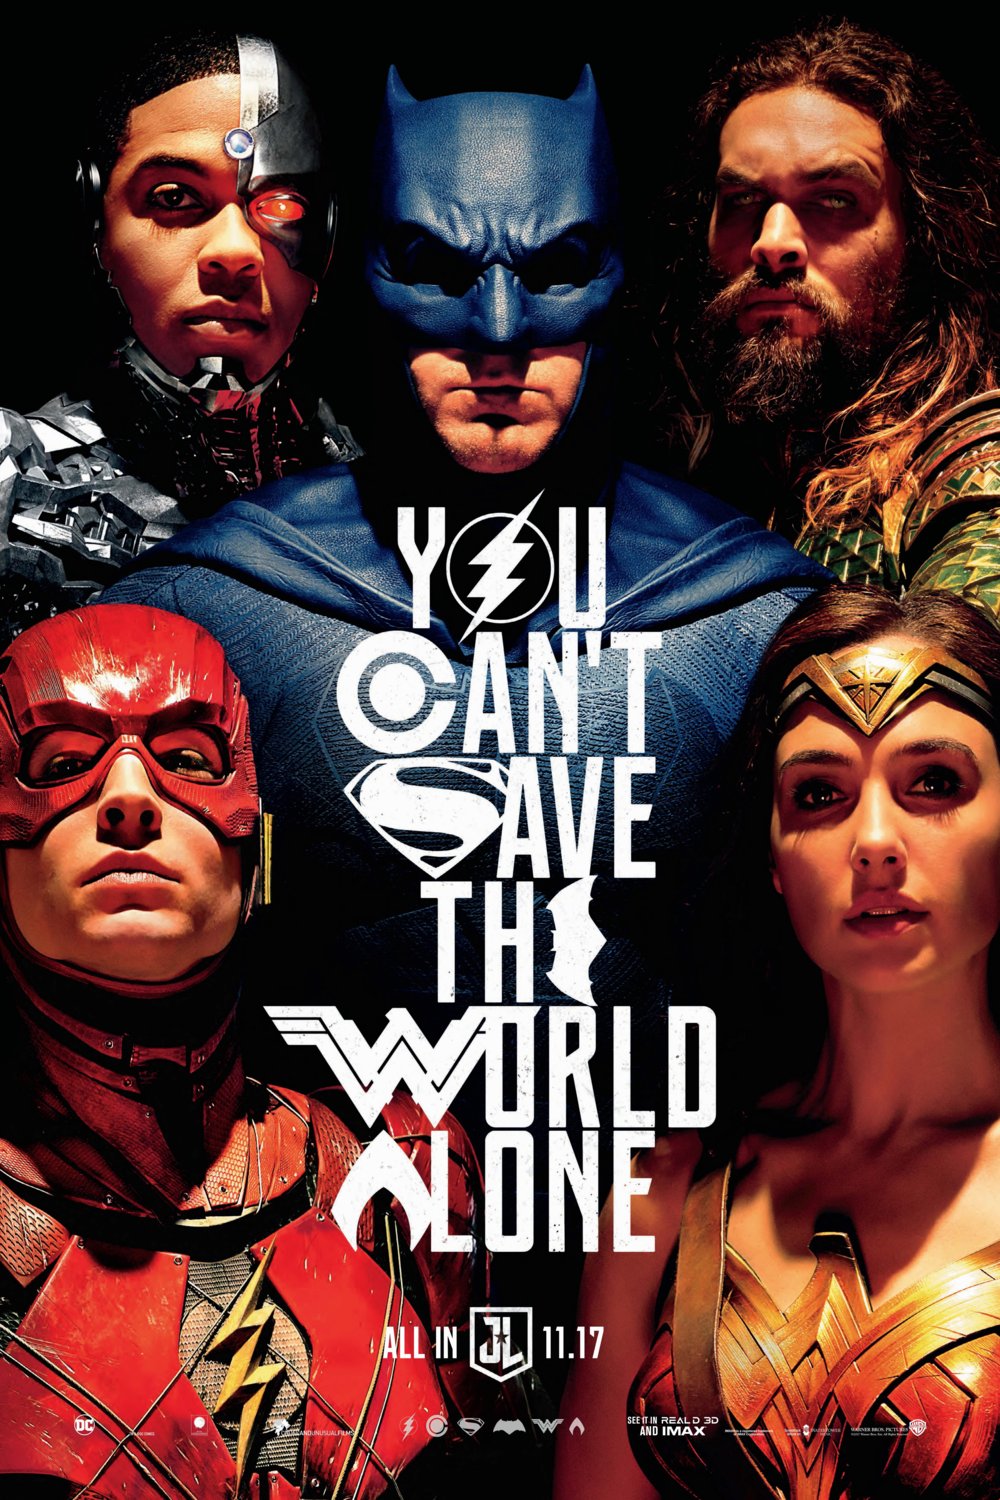 Poster of the movie Justice League